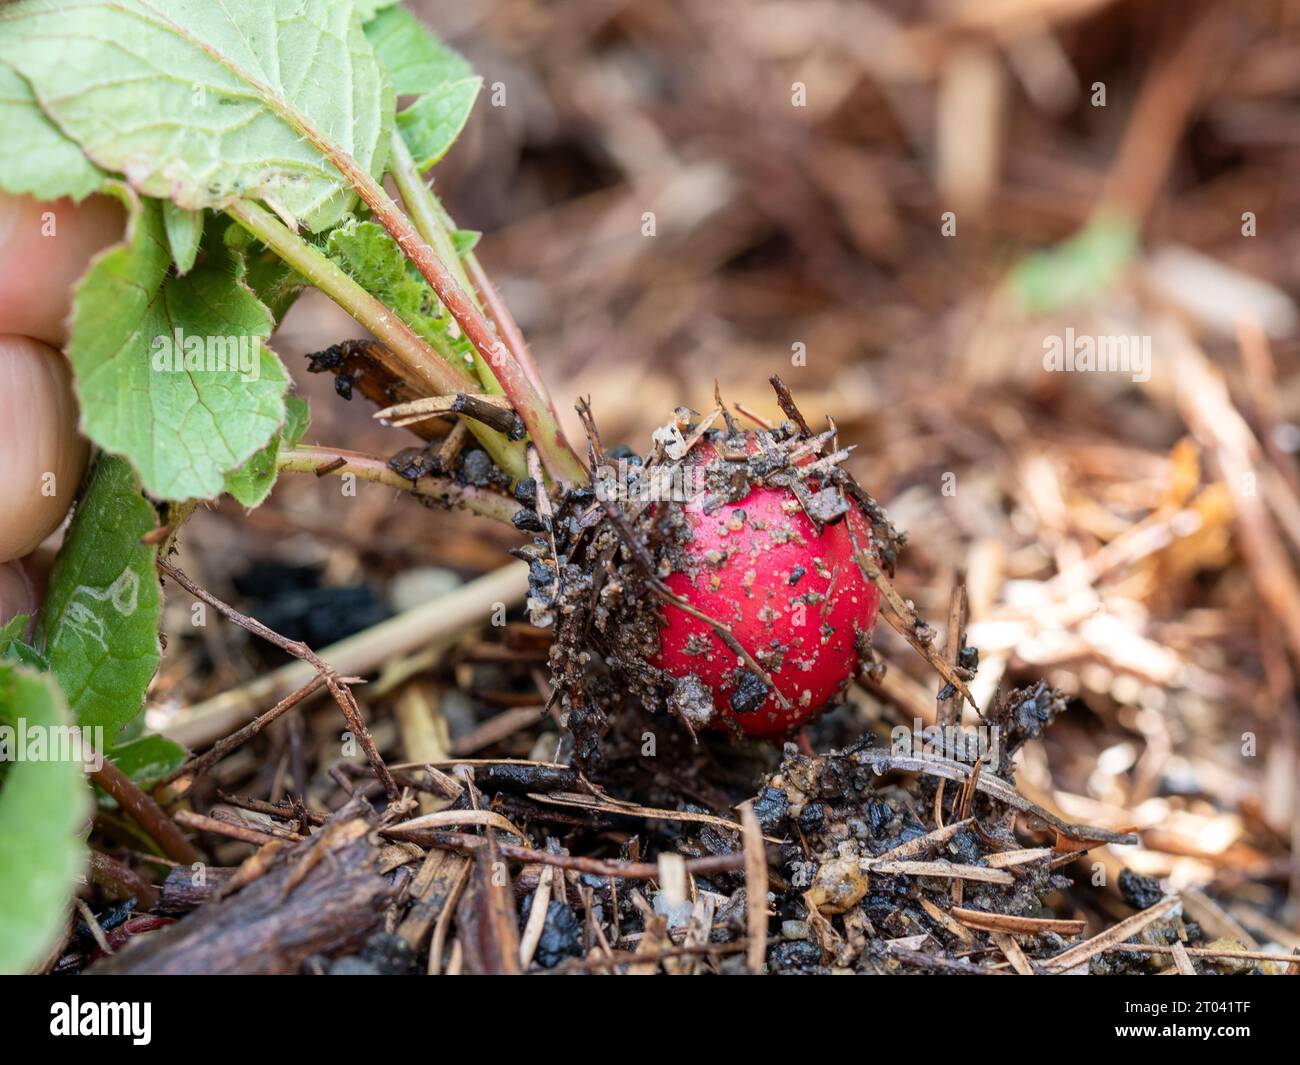 A red Radish and plant with green leaves  being pulled up from the dirt in an Australian vegetable garden, harvesting Stock Photo